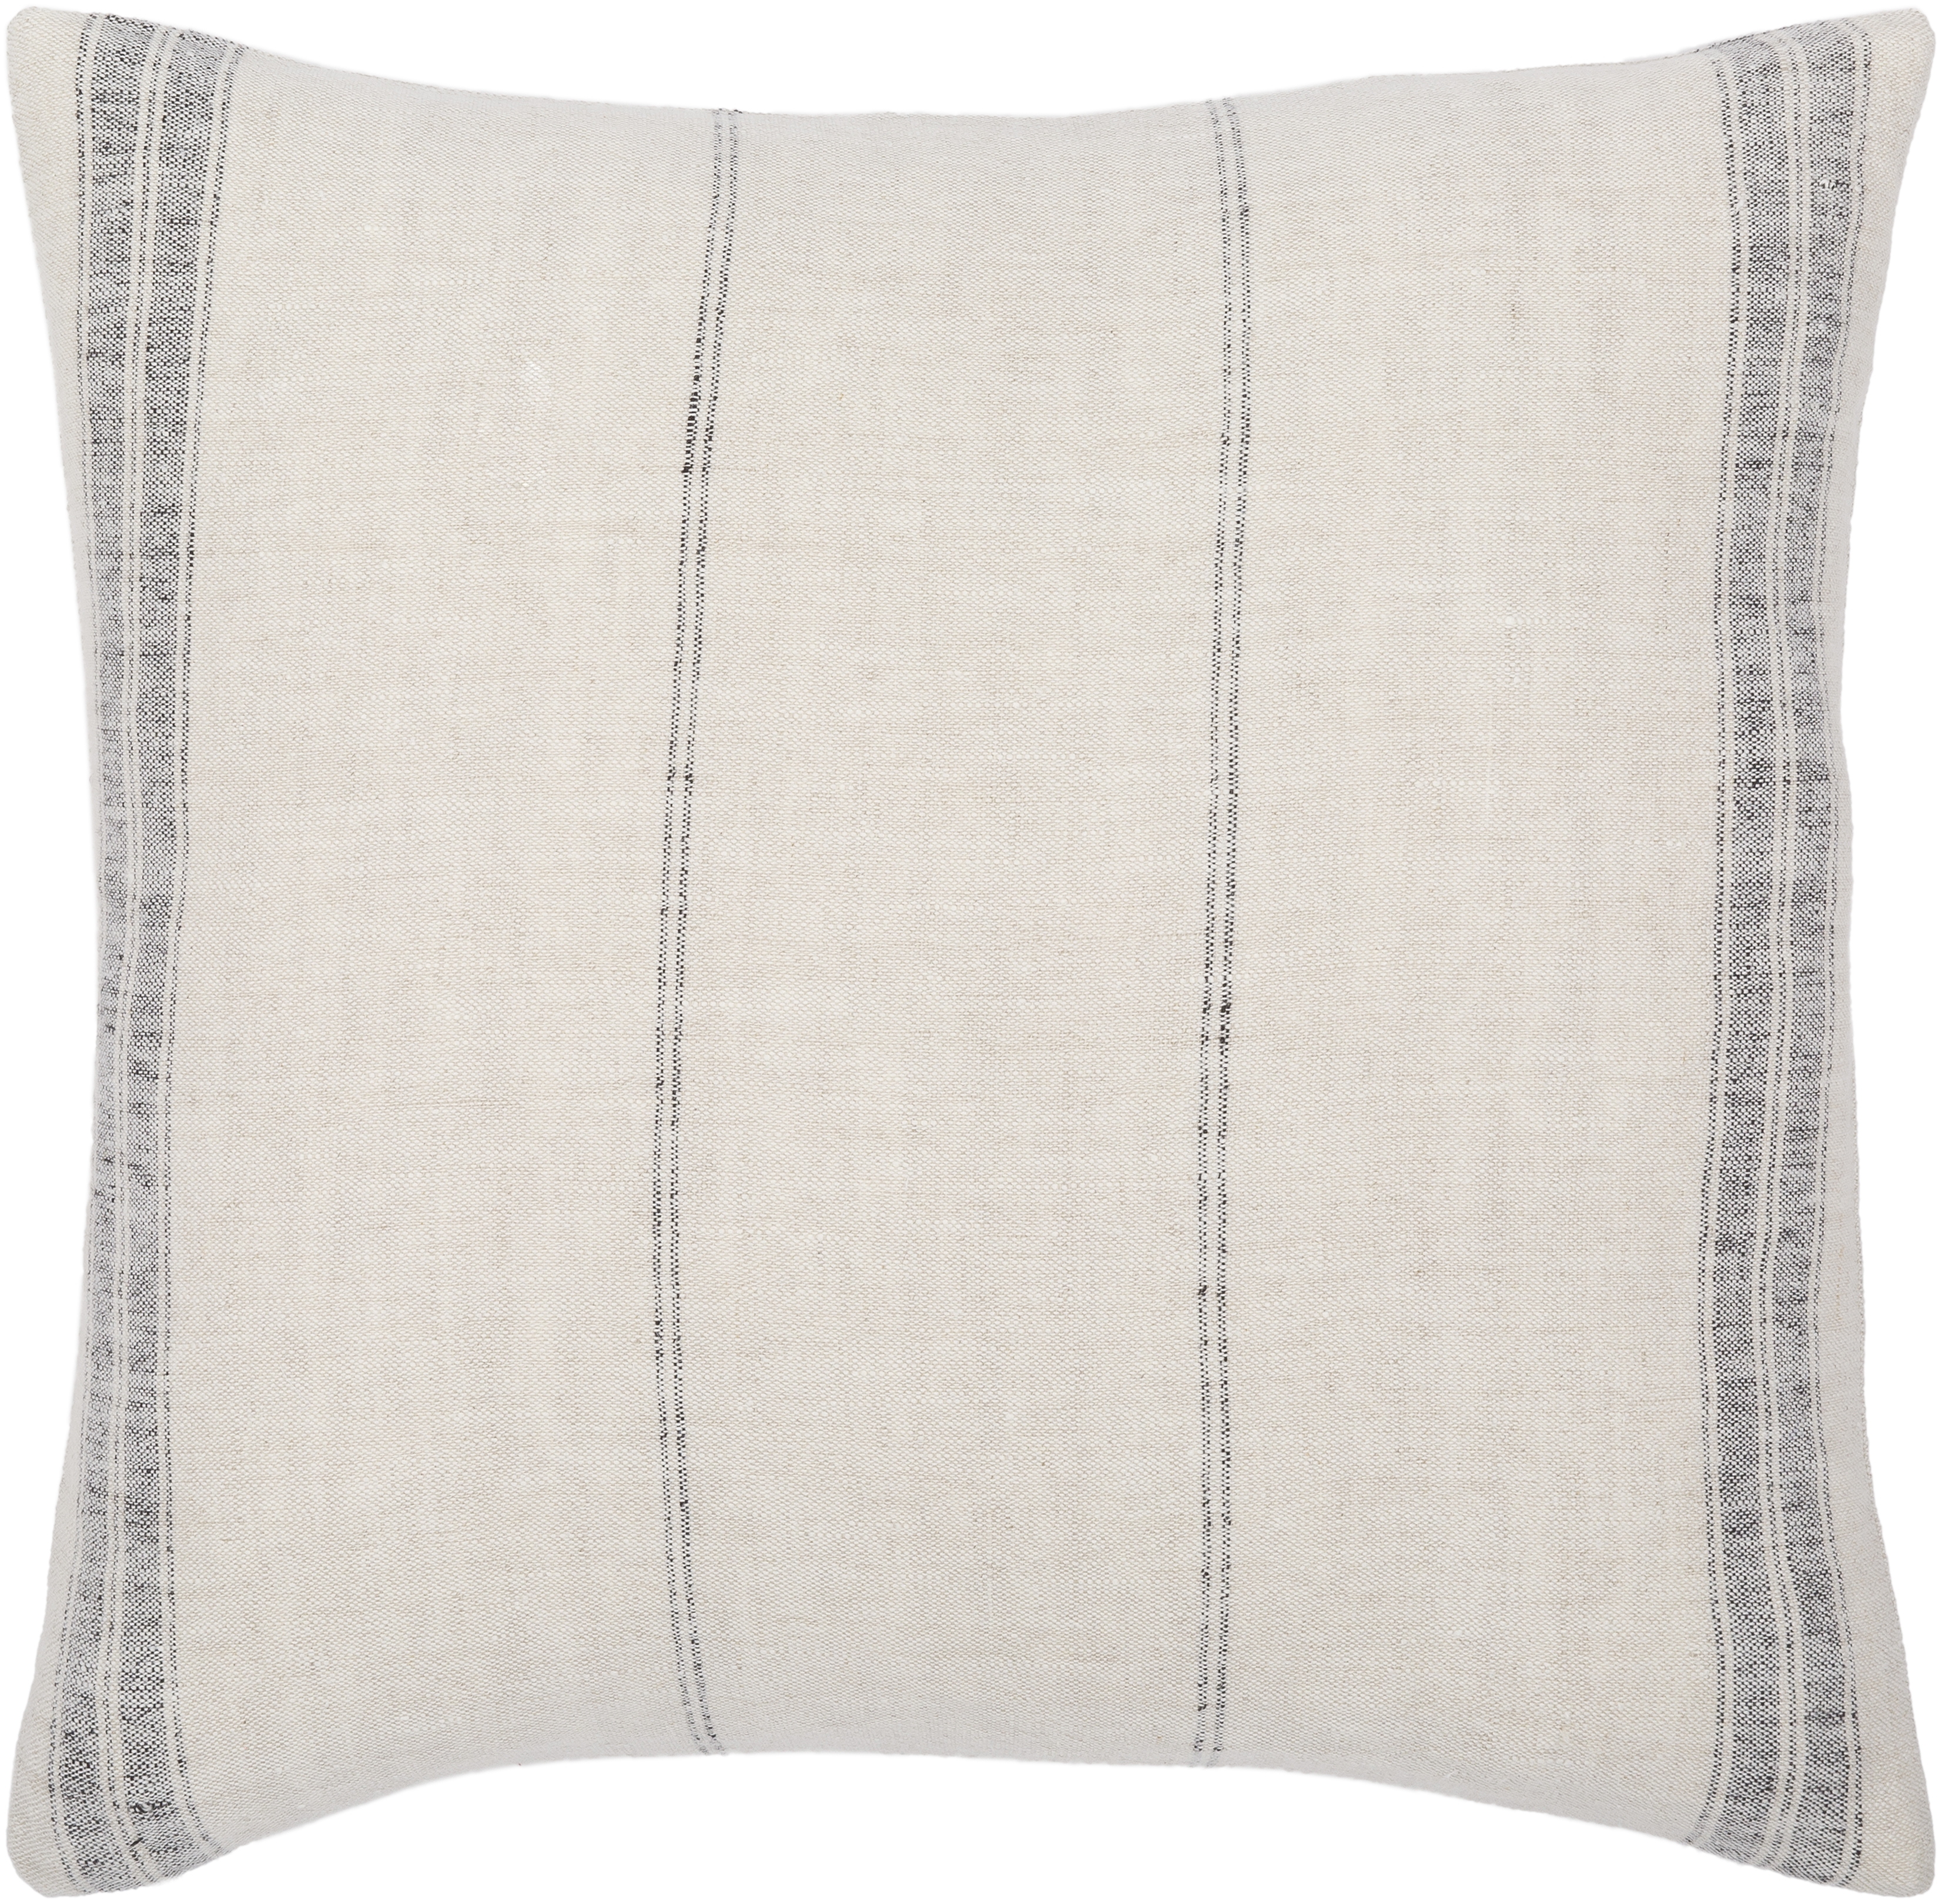 Linen Stripe Vintage Throw Pillow, 20" x 20", with poly insert - Image 0